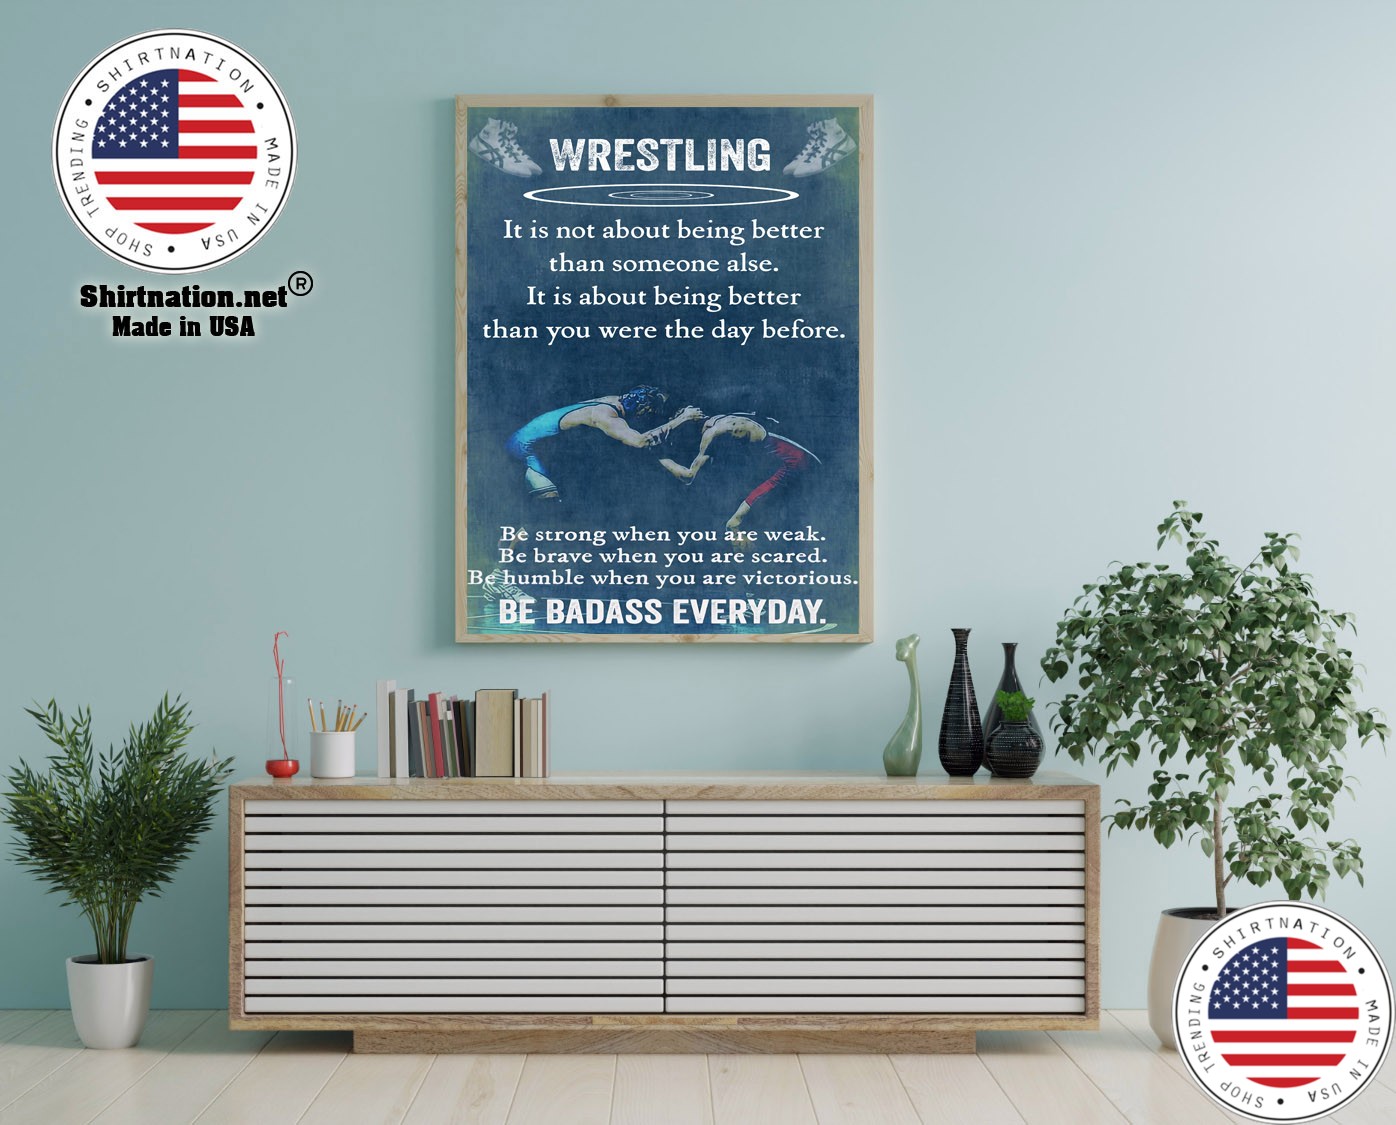 Wrestling it is not about being better than someine else poster 12